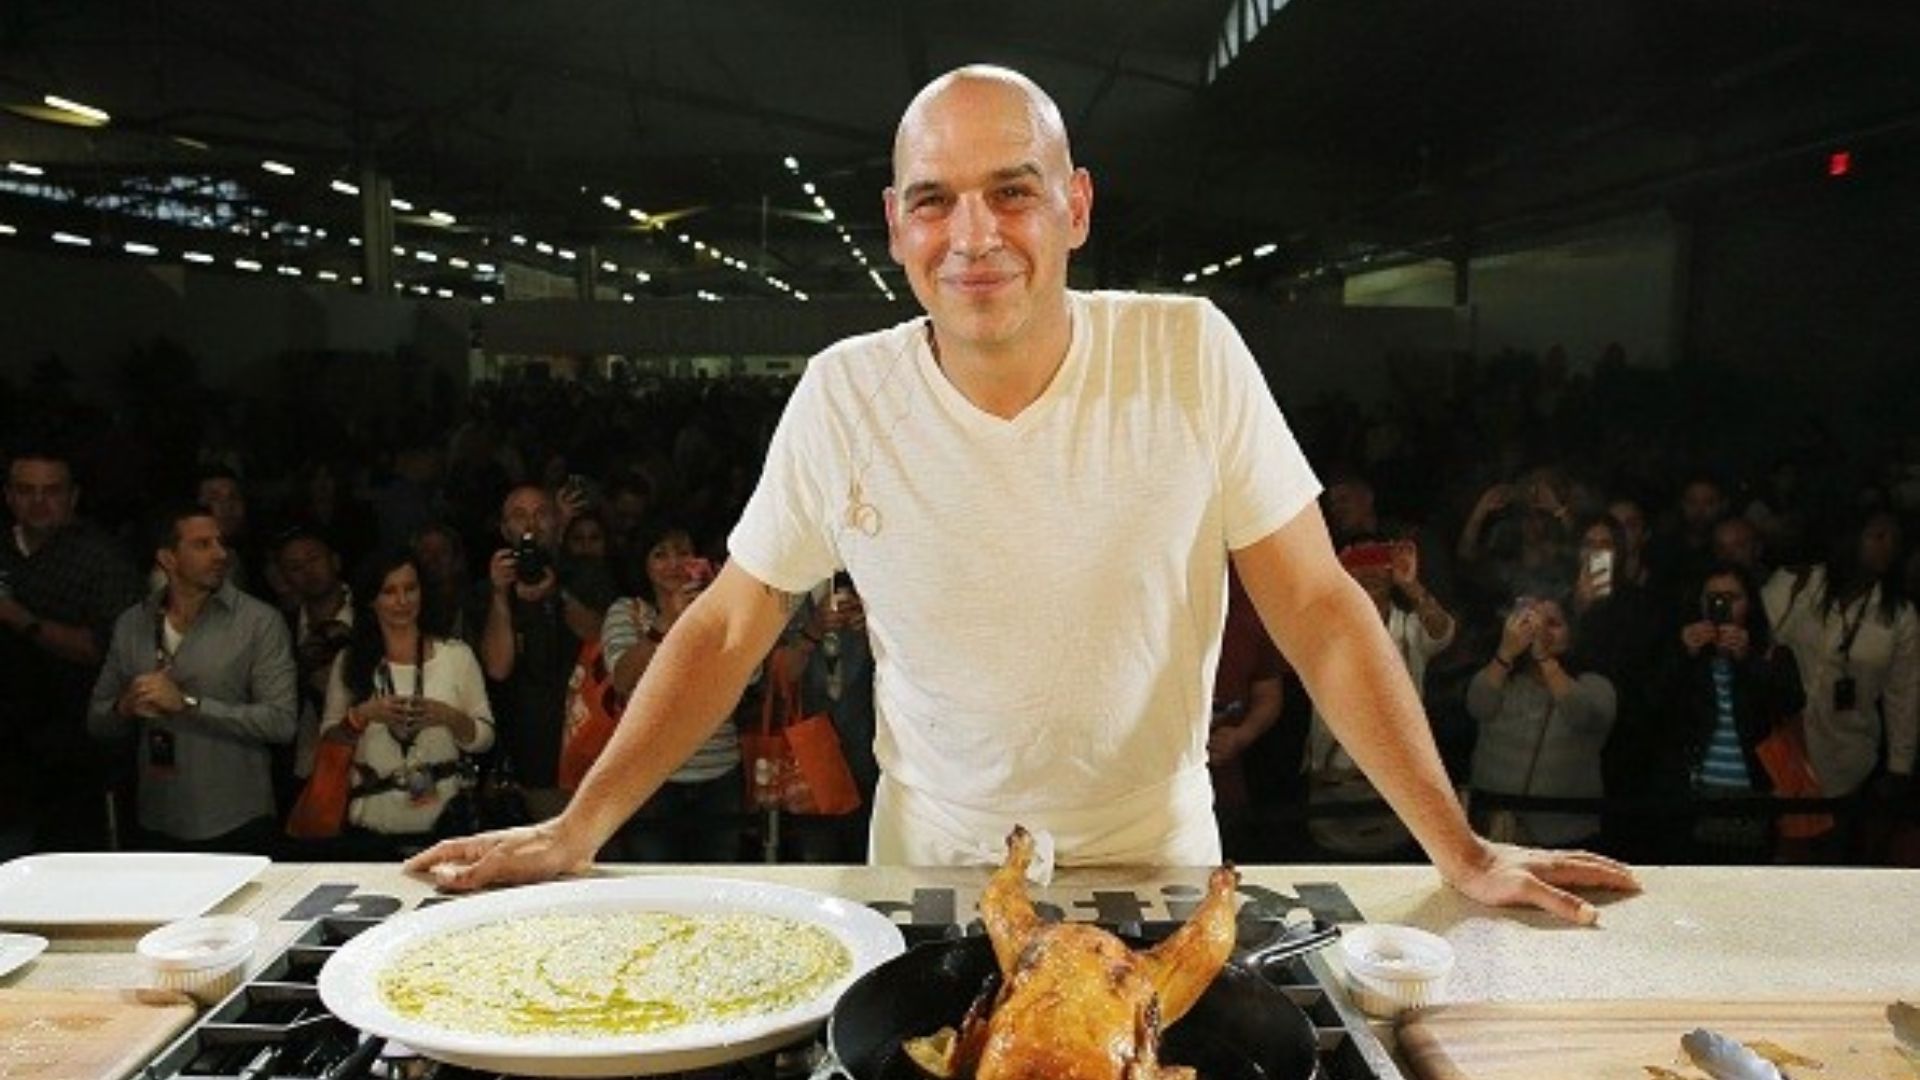 Michael Symon Net Worth - A Journey From Ohio Kitchens To Global Acclaim